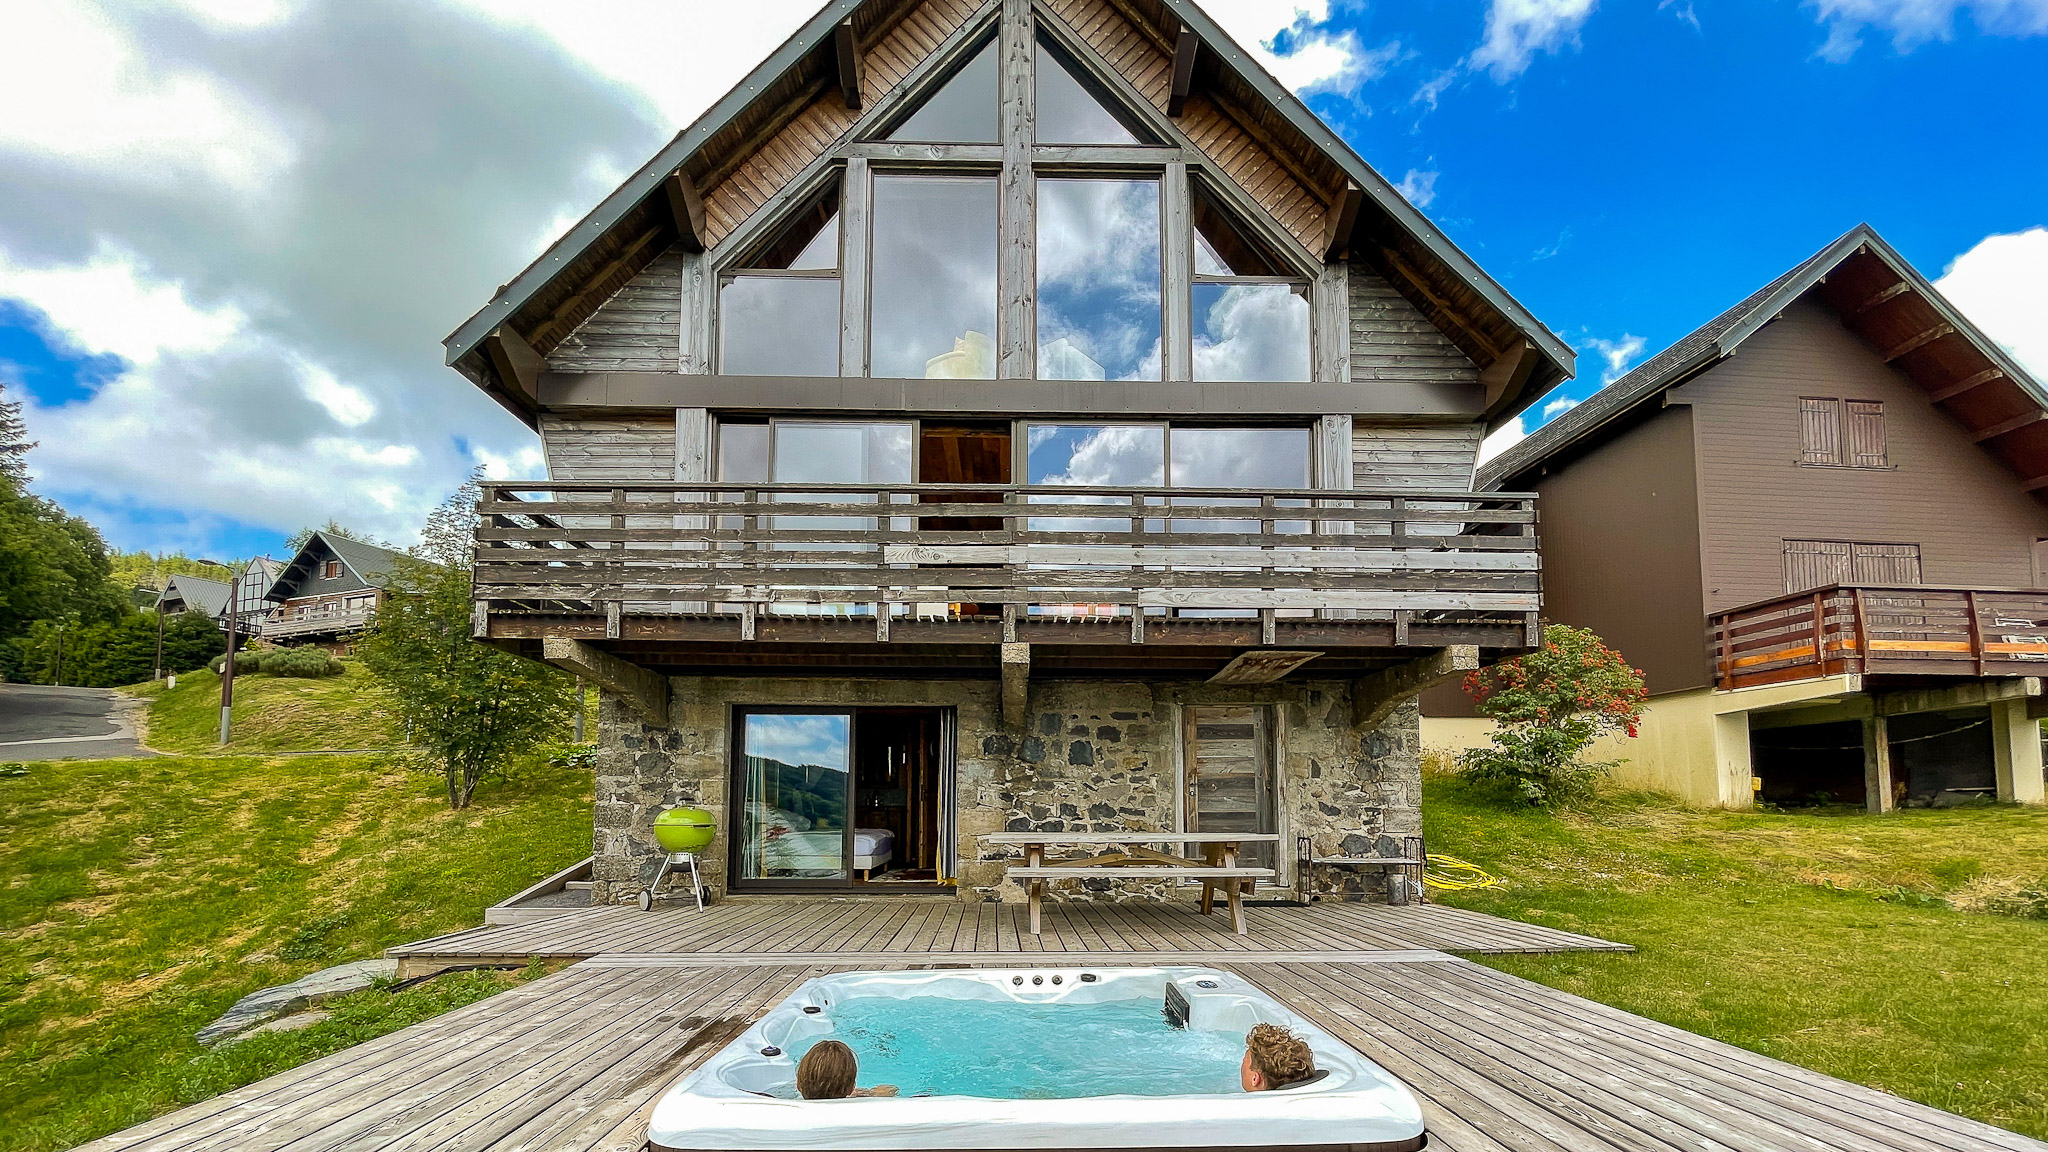 Spa Super Besse, relaxation at the Anorak Super Besse chalet